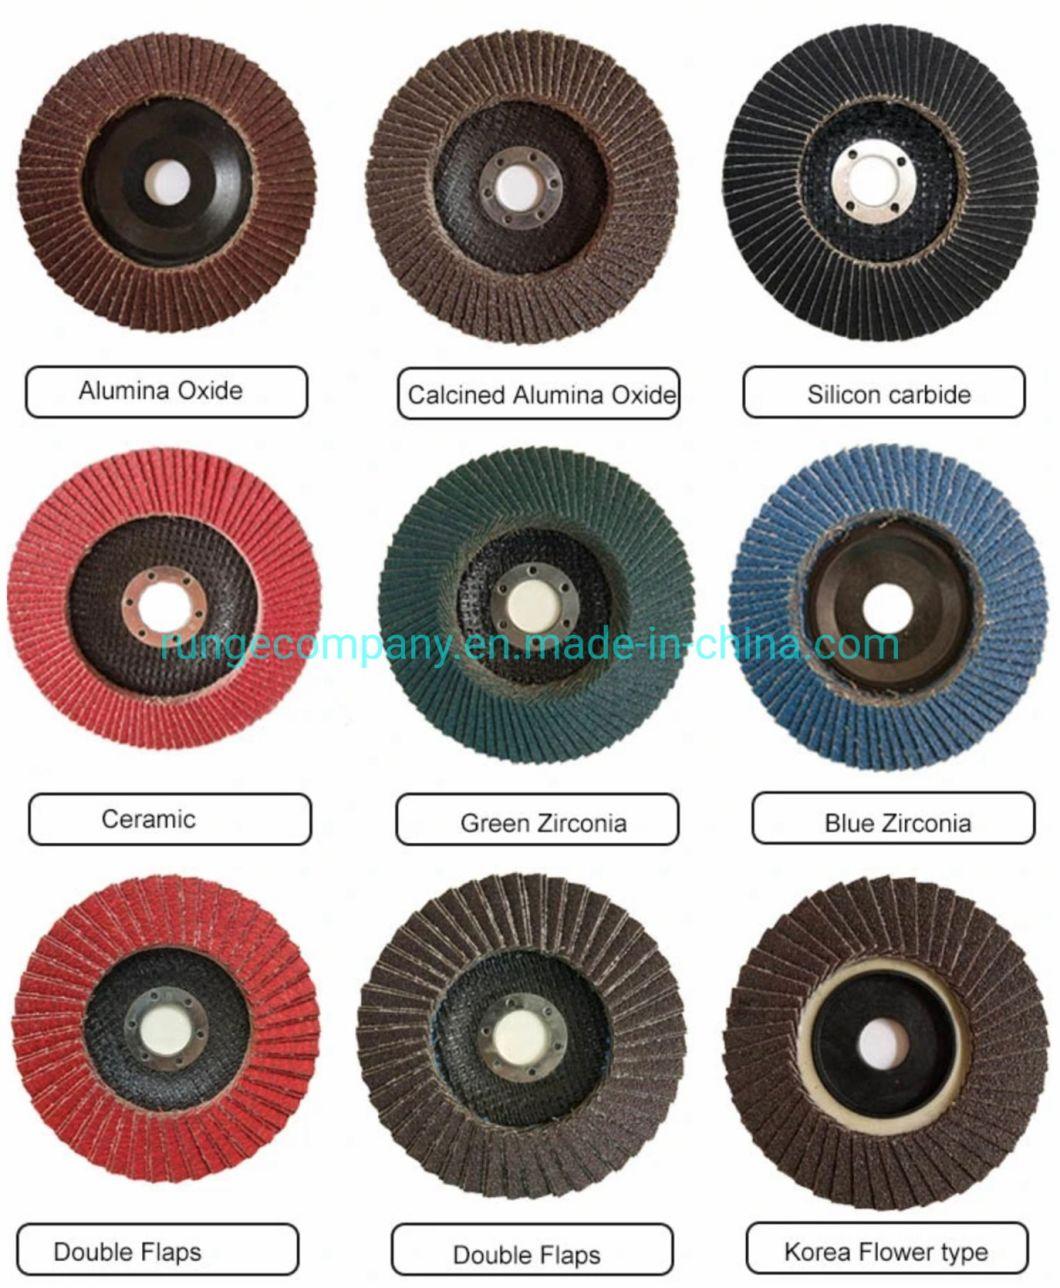 Hardware and Power Electric Tools Accessories Cut off Wheels 4 X 1/16 X 5/8 for Ferrous Metal, Steel